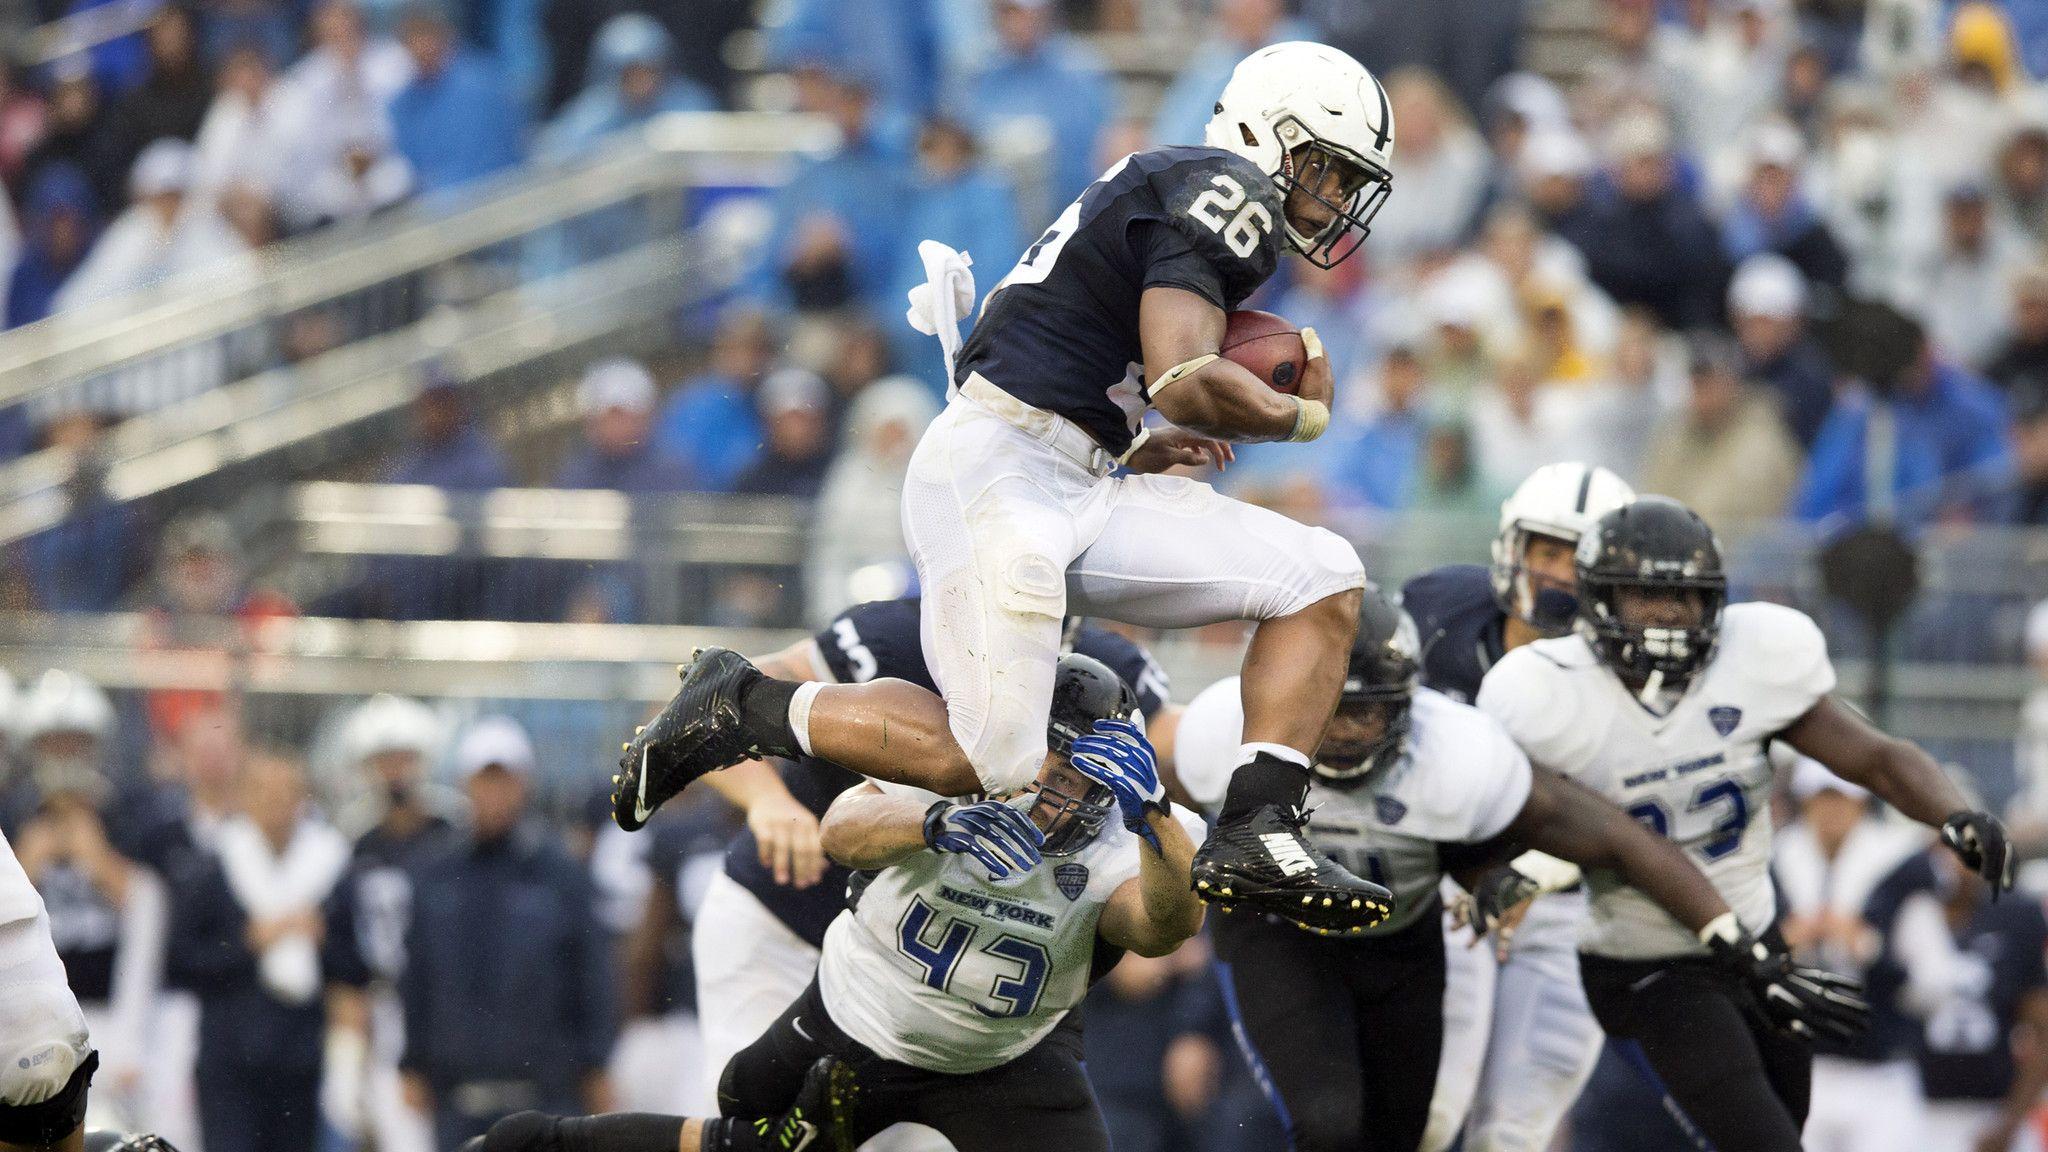 PICTURES: What's next for Penn State's Saquon Barkley?